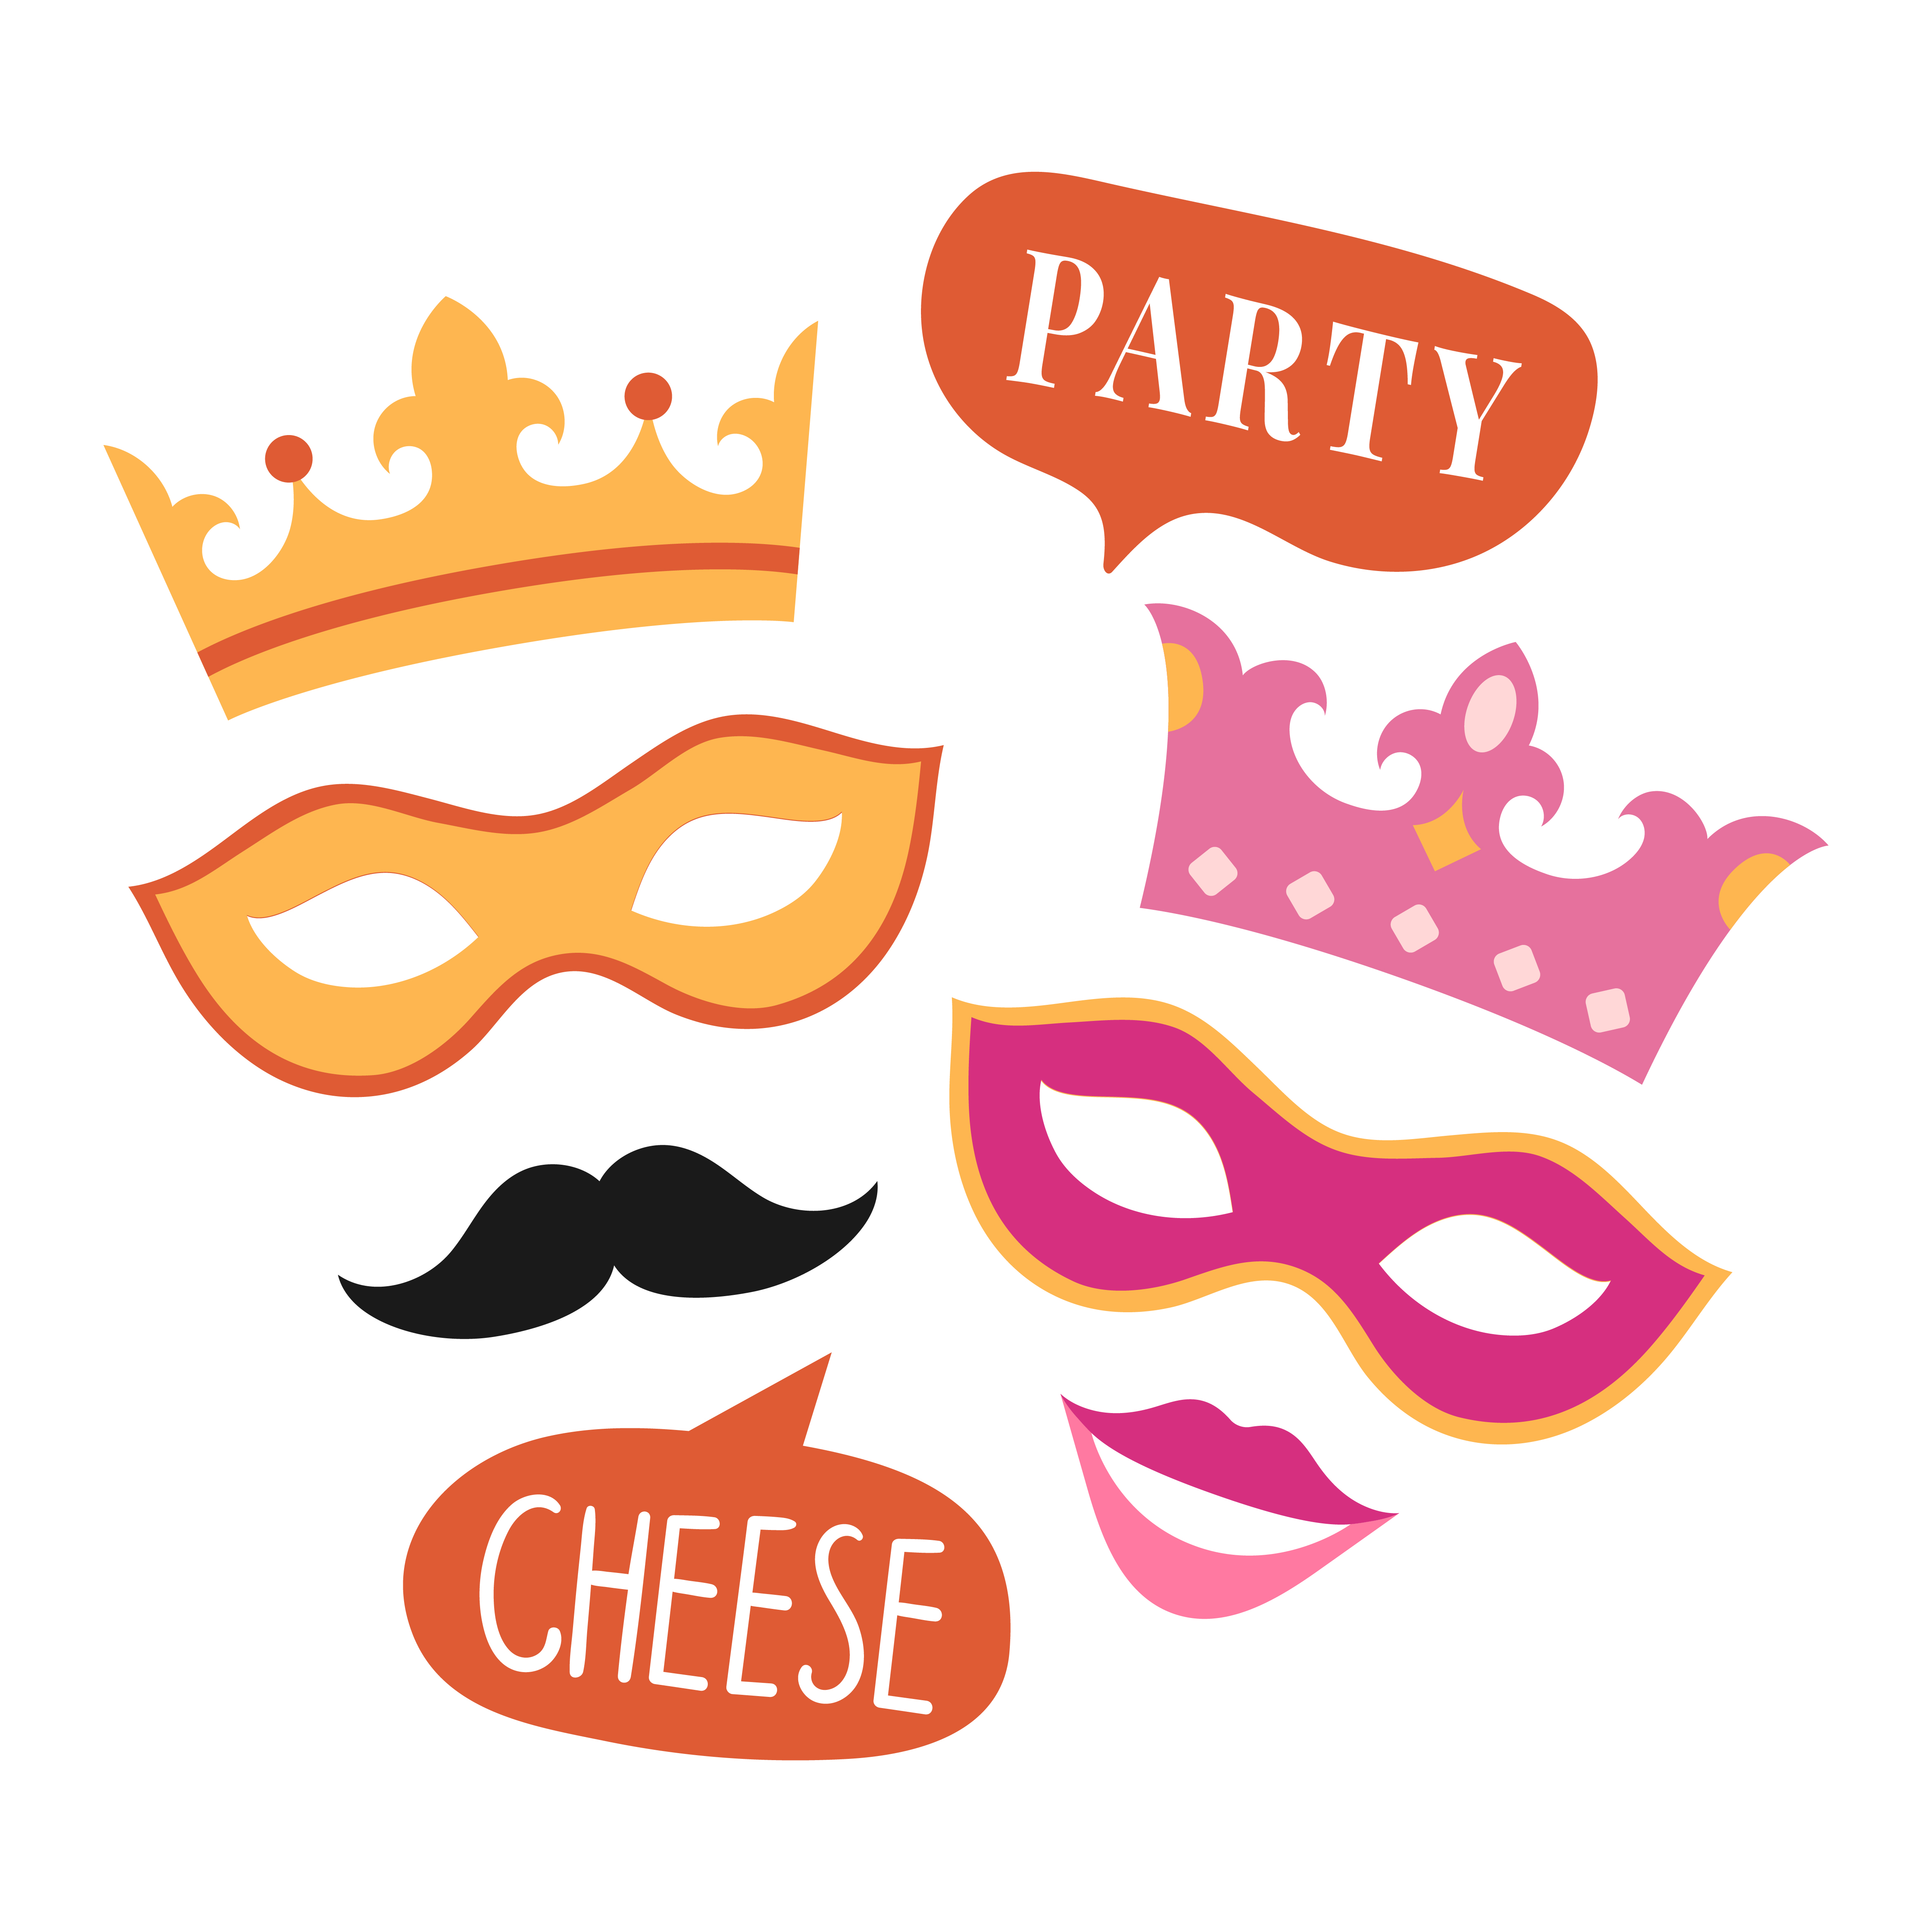 party-photo-booth-props-vector-download-free-vectors-clipart